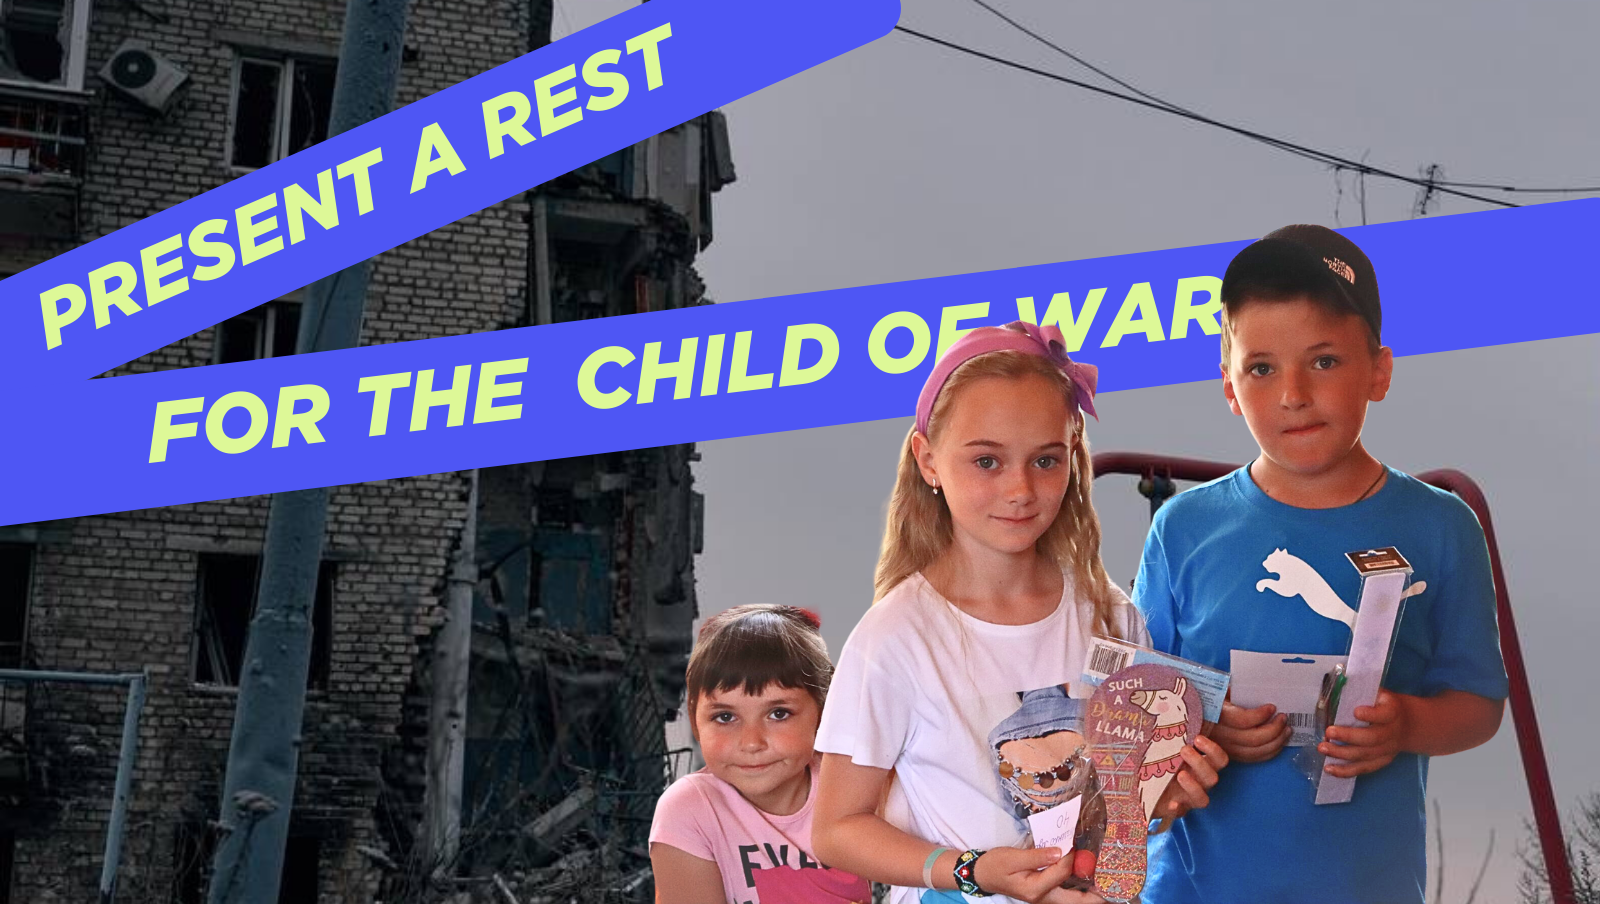 Present a rest for the child of war